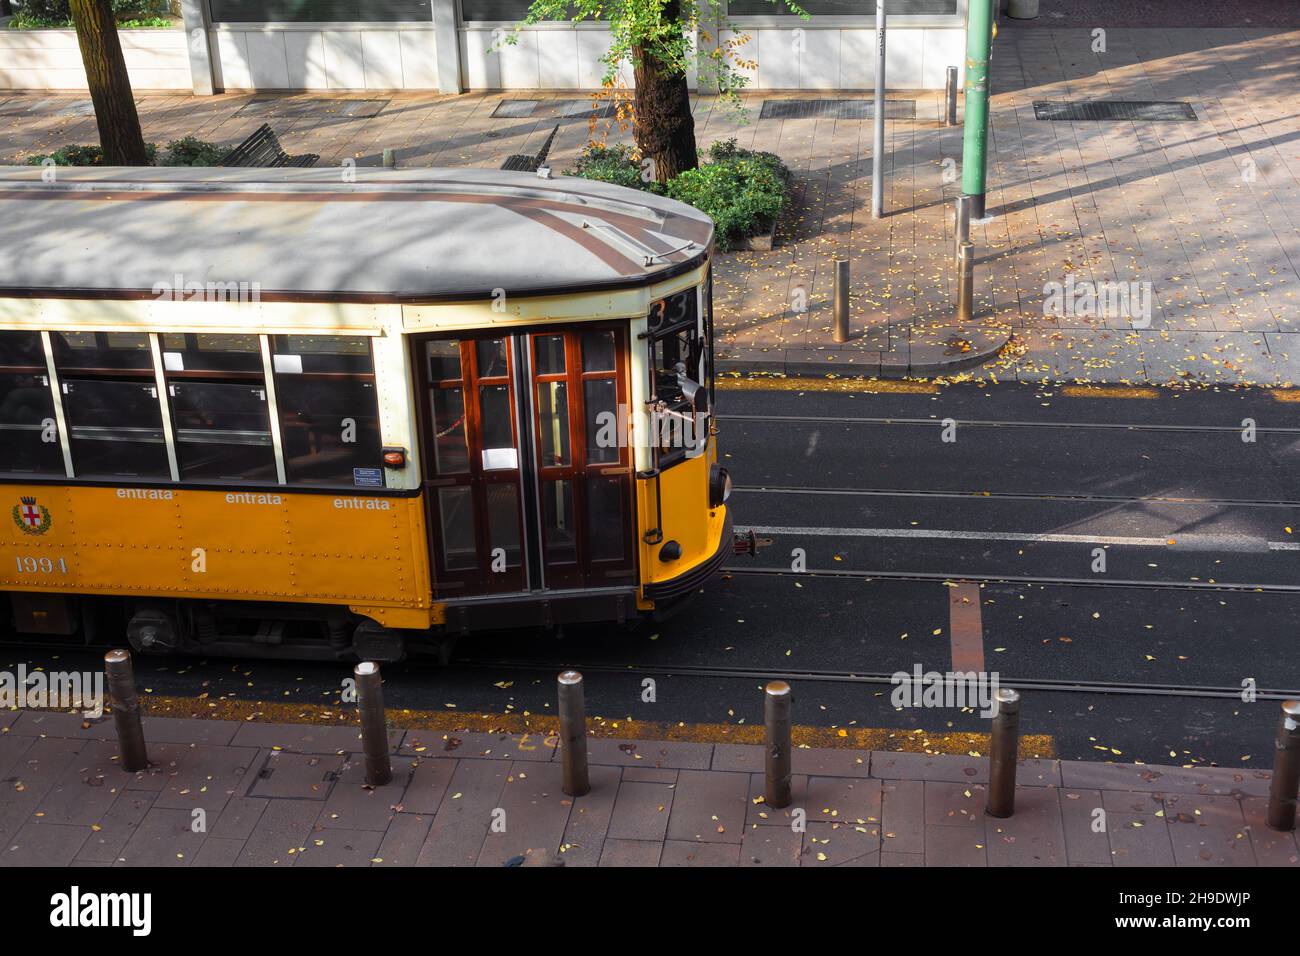 View of the old vintage orange tram on the street of Milan, Italy Stock Photo